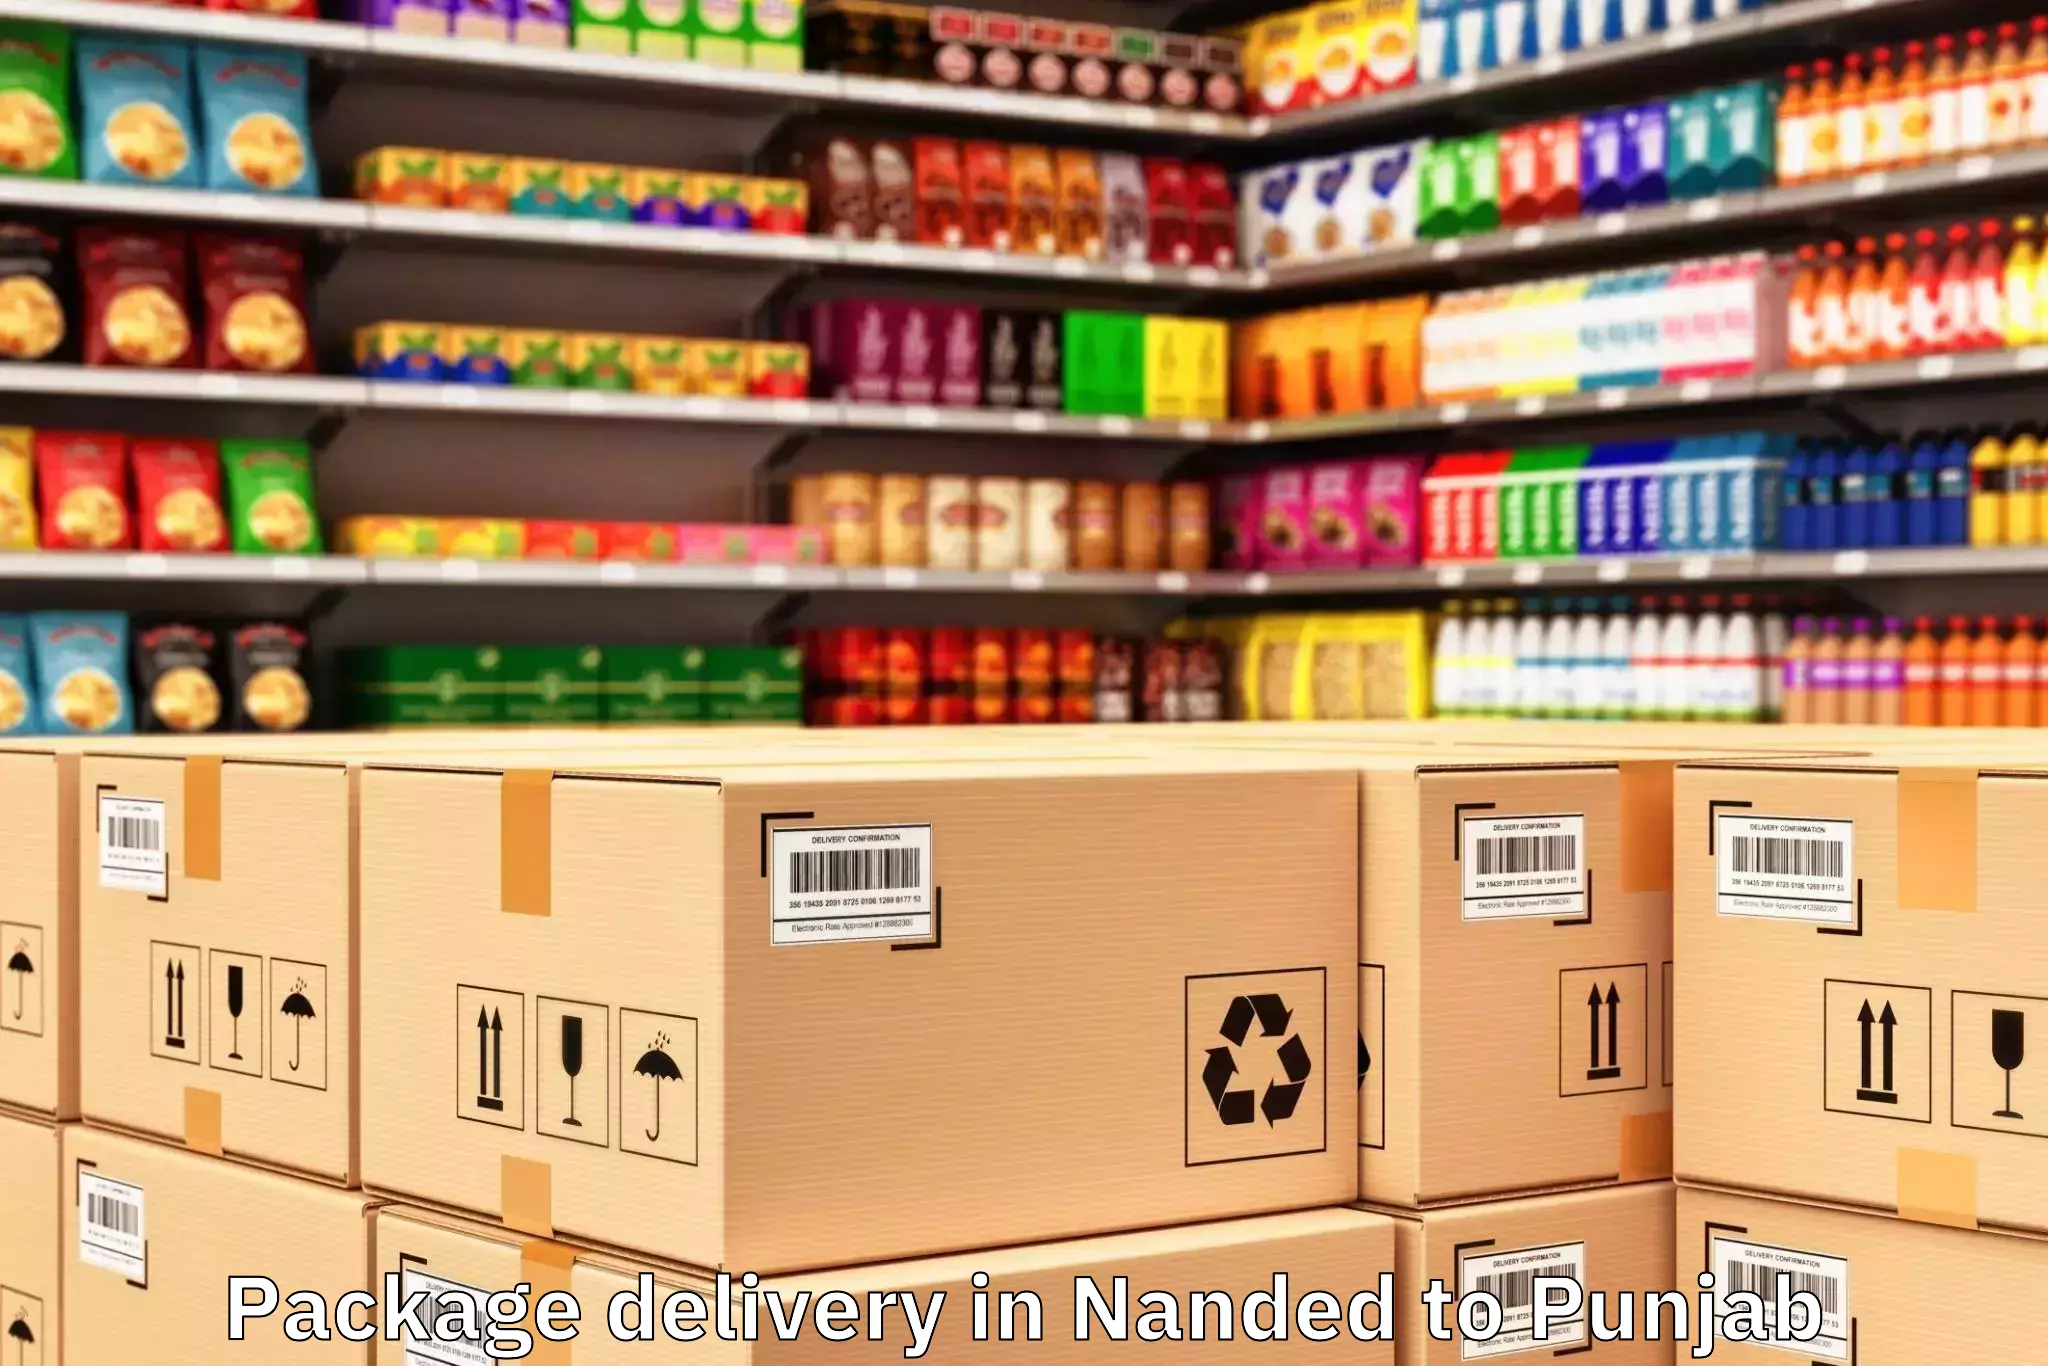 Get Nanded to Punjab Package Delivery